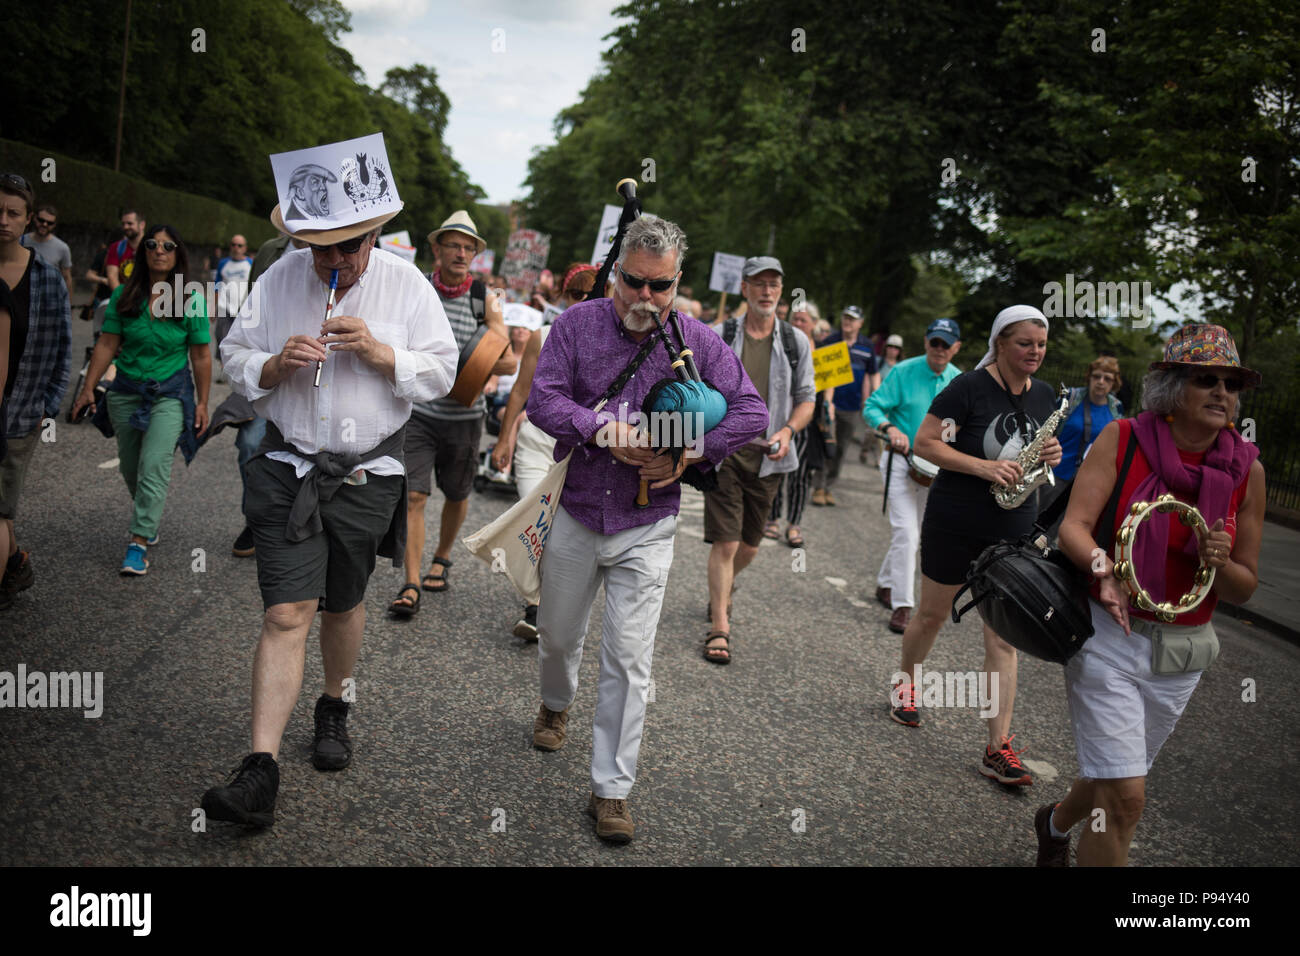 Edinburgh, Scotland, on 14 July 2018. 'Carnival of Resistance' anti-Trump rally, coinciding with the visit of President Donald Trump, and his wife Melania, to Scotland on a golfing weekend. The rally, which was attended by 1,000's of people protesting the policies of President Trump and his visit to the United Kingdom, made its way from the Scottish Parliament through the streets of the city. Credit: jeremy sutton-hibbert/Alamy Live News Stock Photo